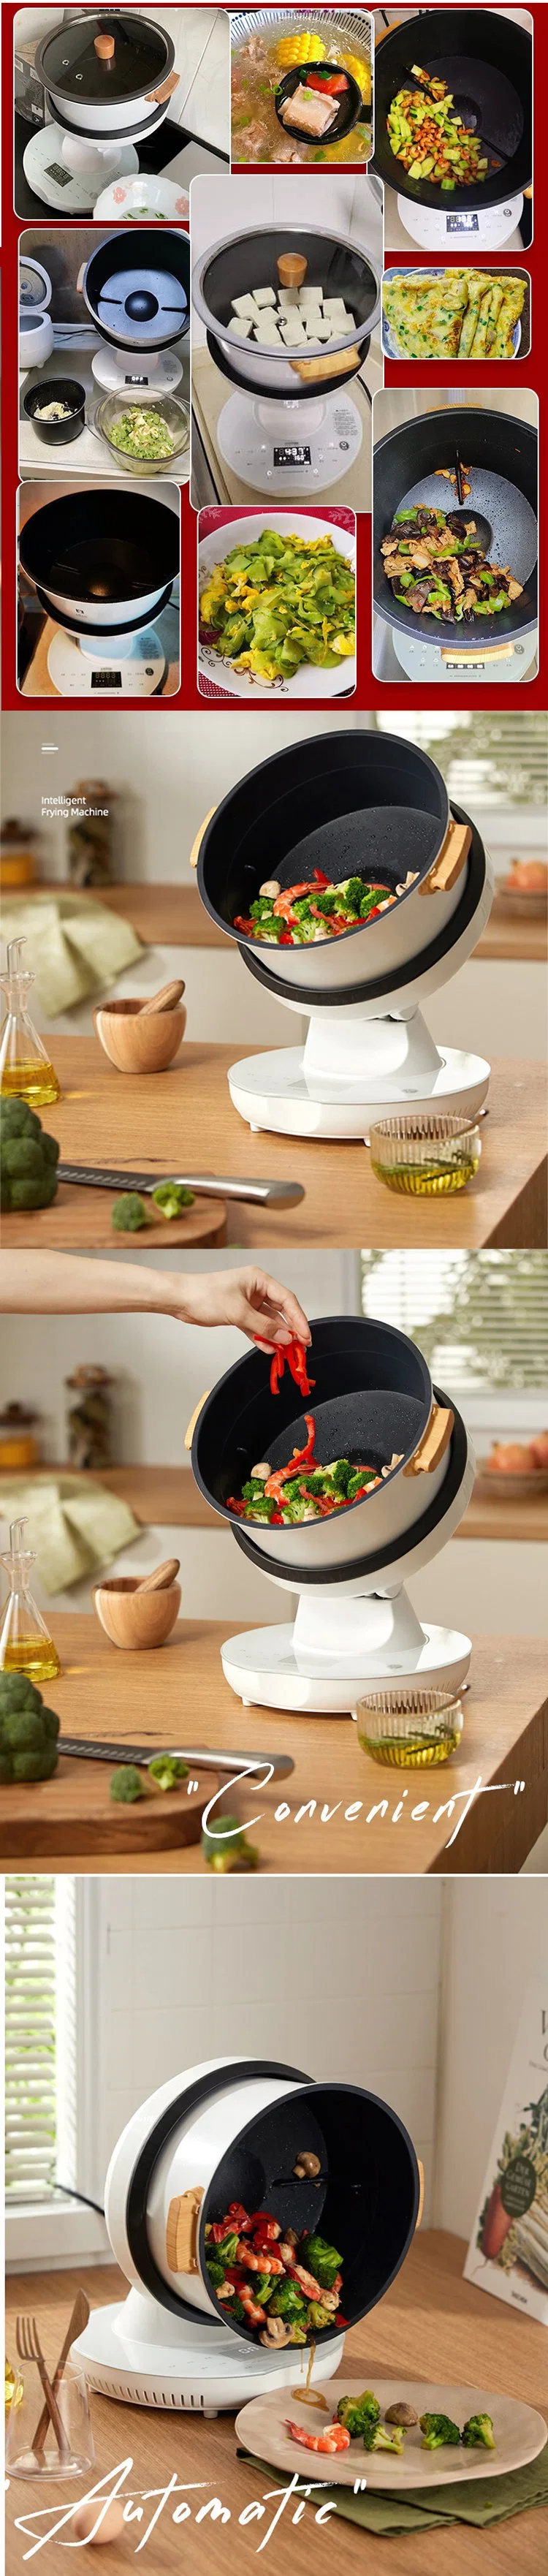 Restaurant Intelligent Cooking Robot Rotating Automatic Wok Cooking Machine Fry Fried Rice Machine Robot Cooker